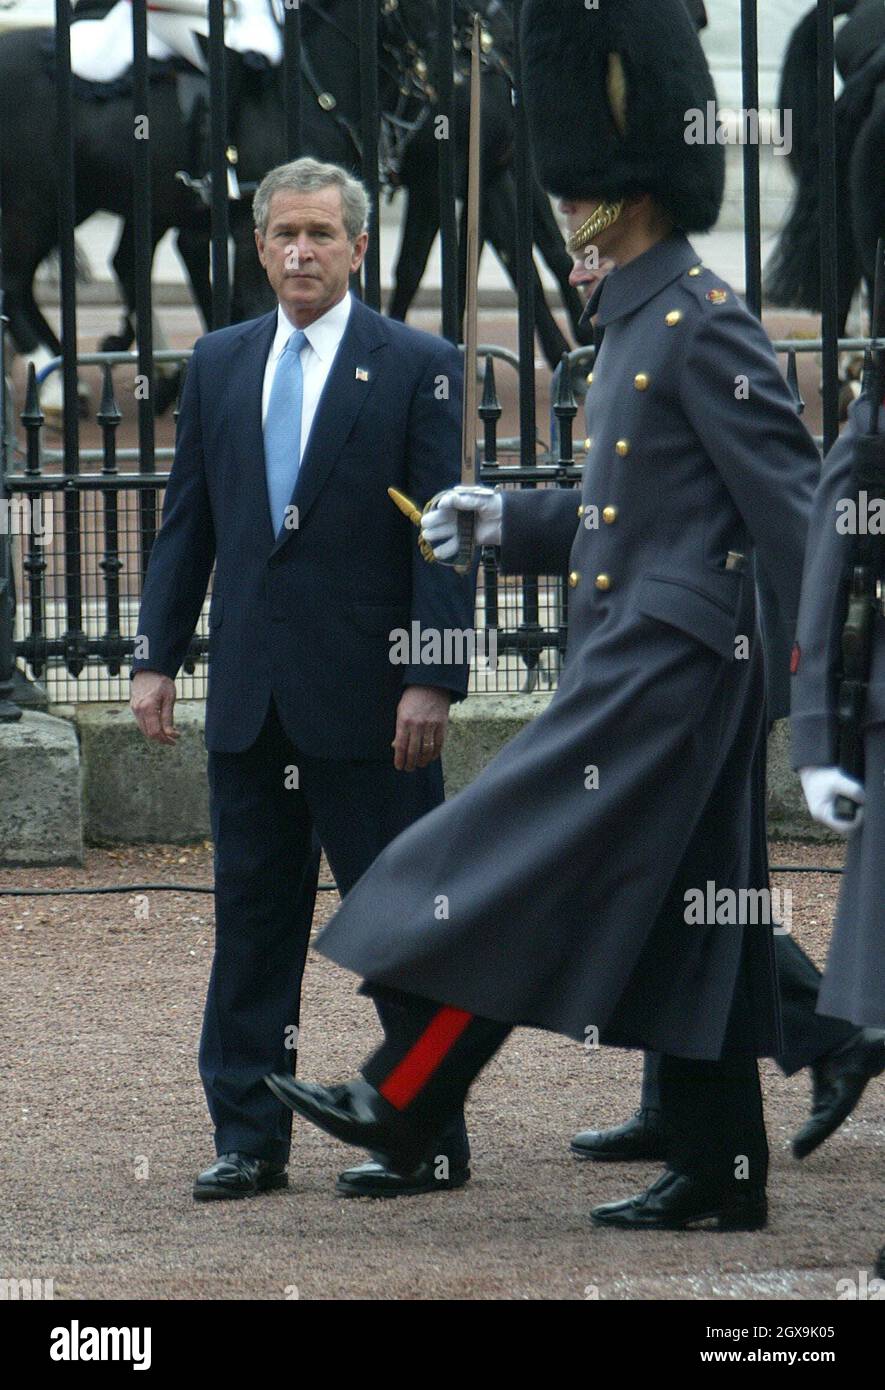 George Bush is welcomed by The Queen and The Duke of Edinburgh to Buckingham Palace at the start of his state visit to Britain. Â©Anwar Hussein/allactiondigital.com    Stock Photo